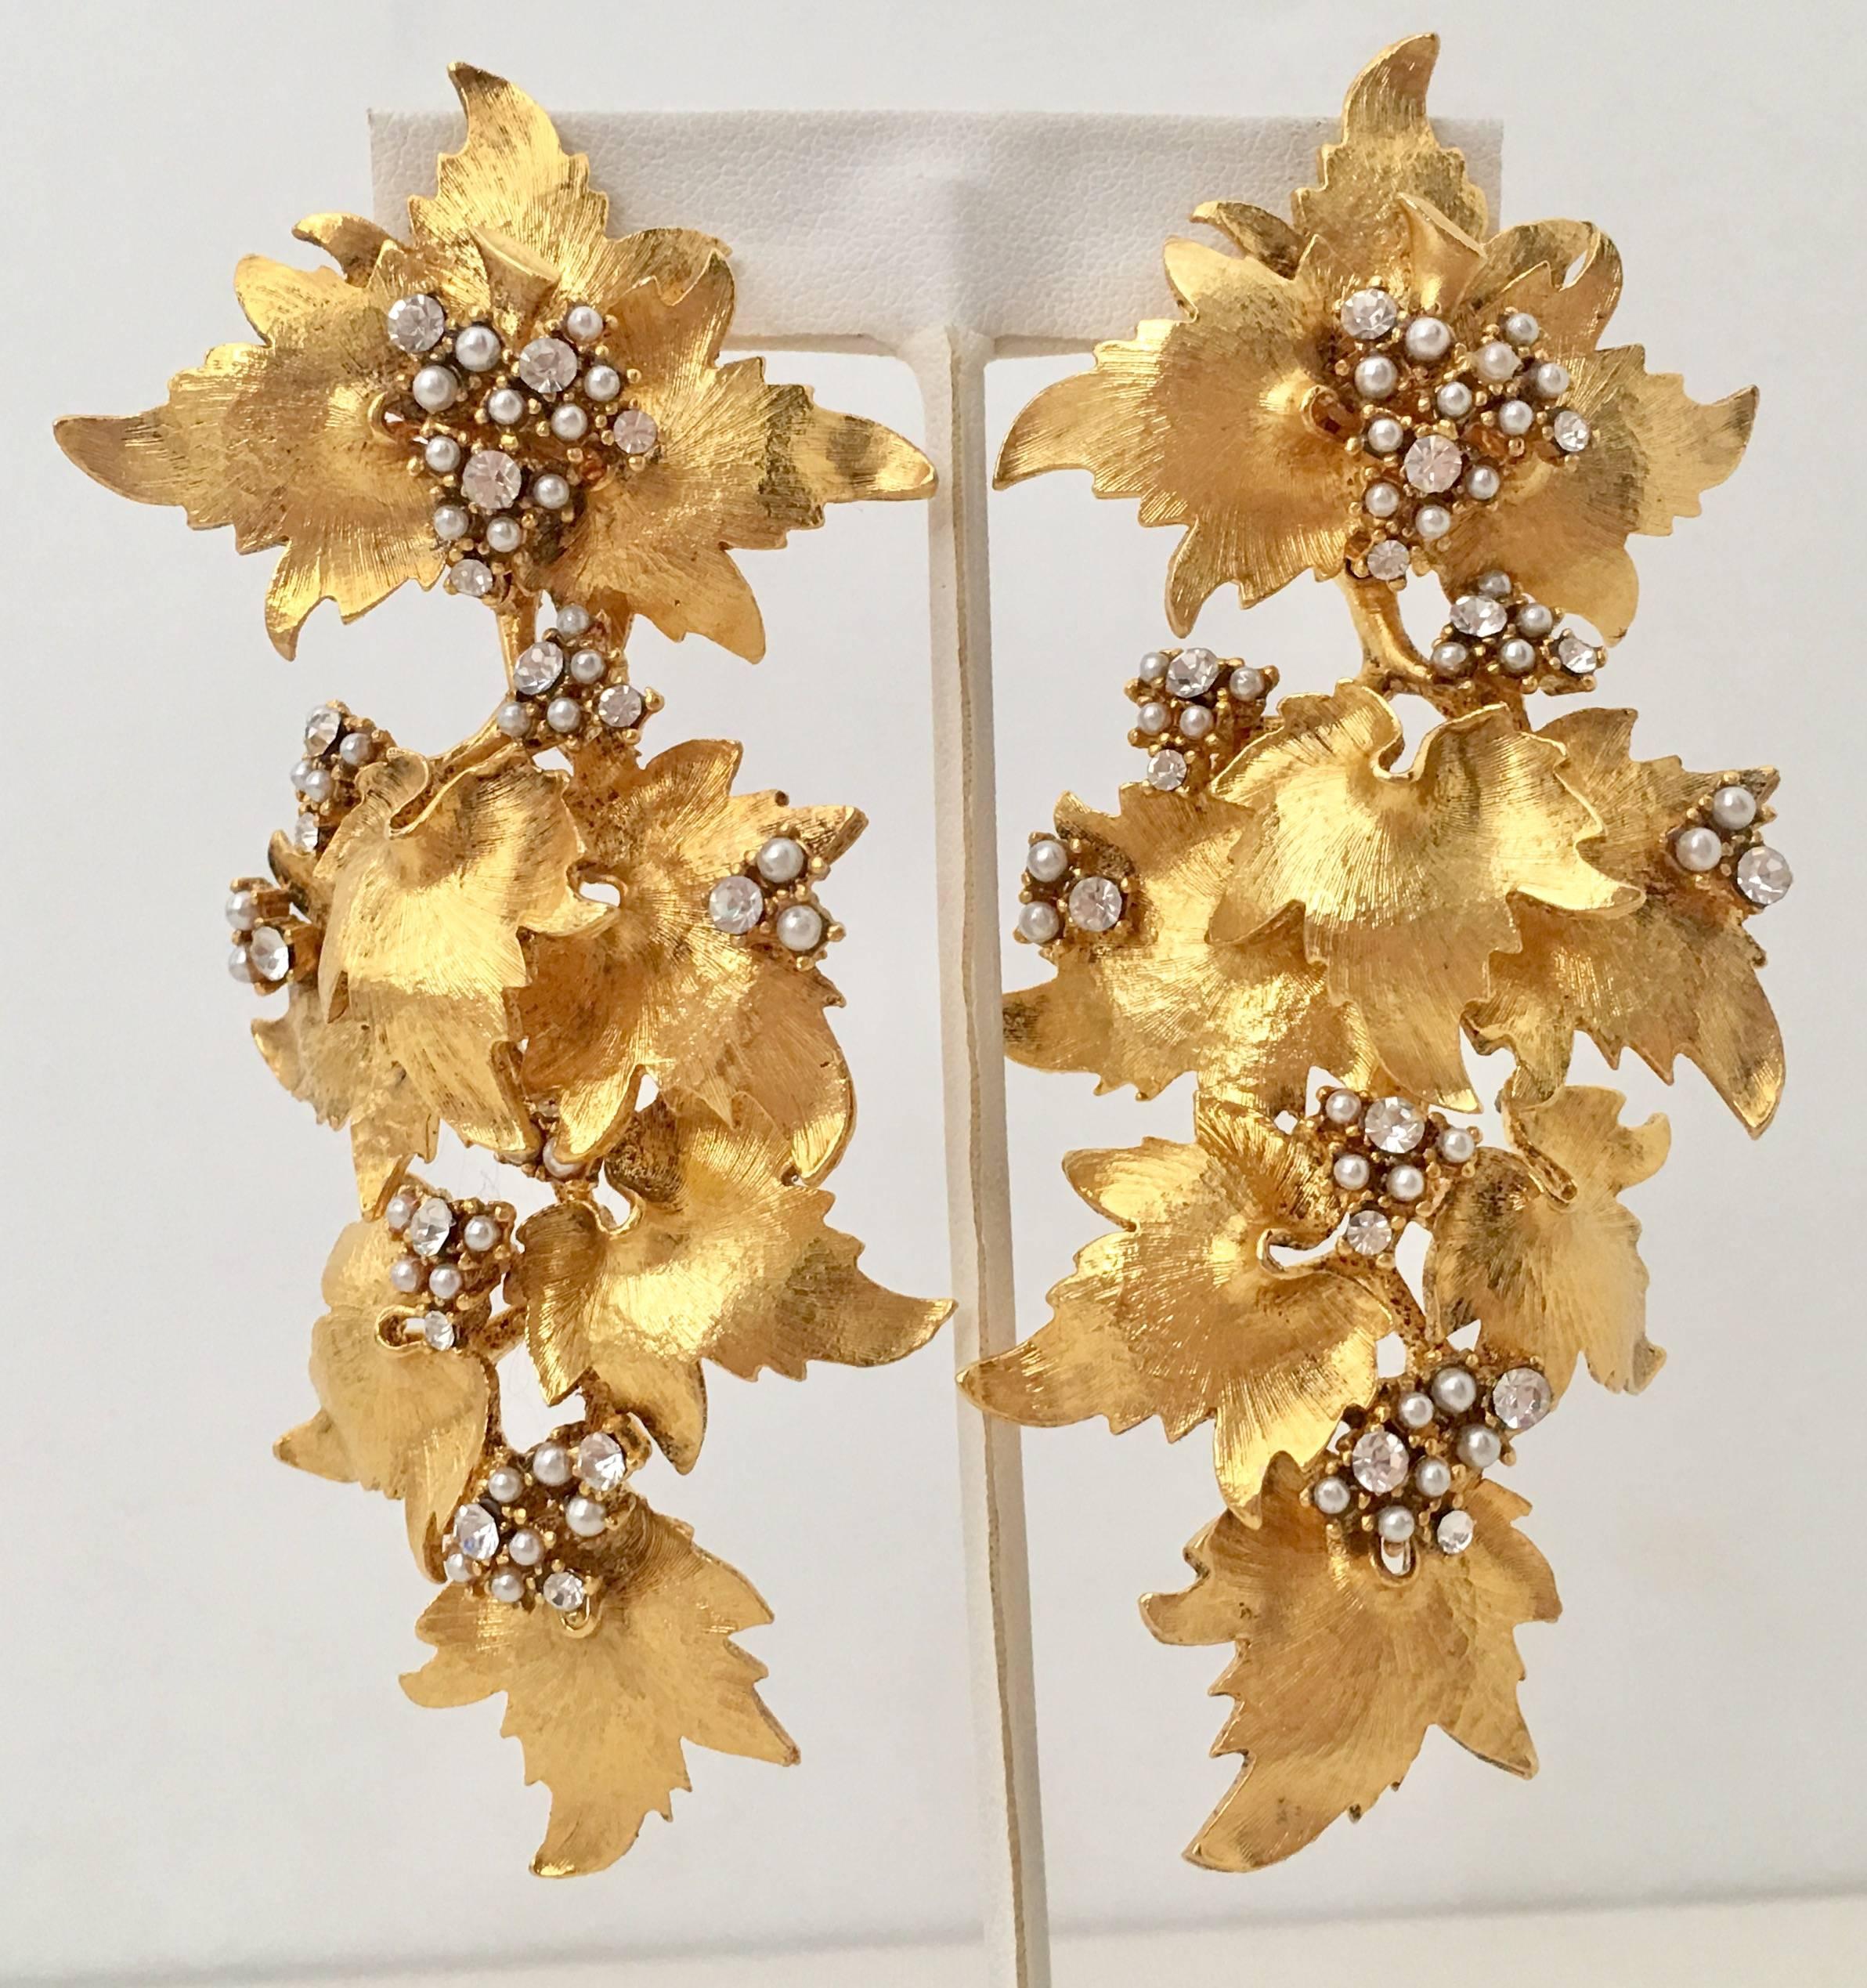 90'S Dramatic Organic Modern & Monumental Stanley Hagler style, brushed gold plate/wash long dangling seed pearl and crystal clear rhinestone detail maple leaf clip style earrings.
Unmarked, most likely Mark Mercy or Ian St. Gieler made. These